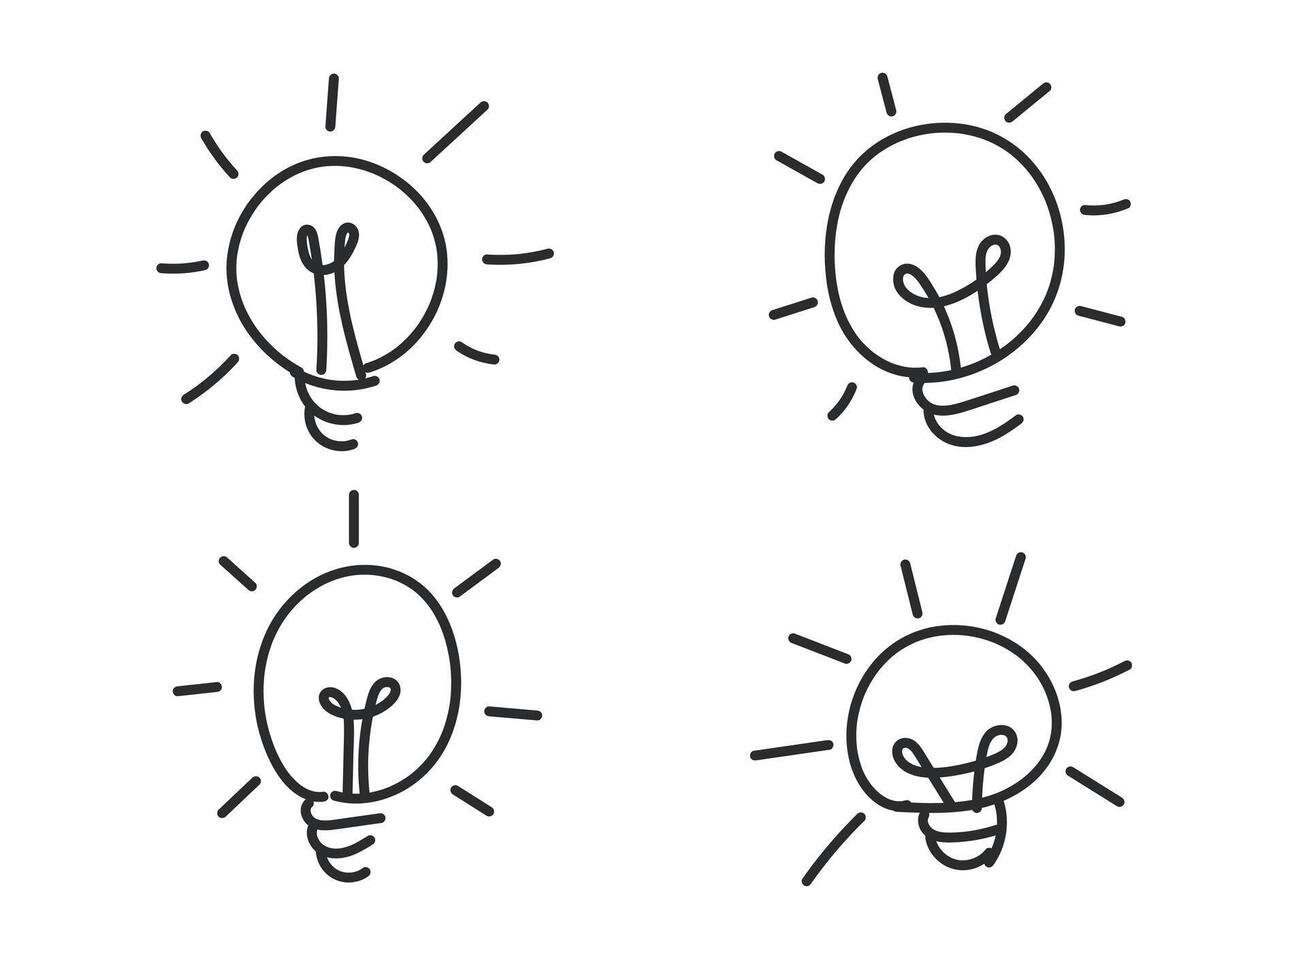 Light bulb with shining light set. doodle style hand drawn vector